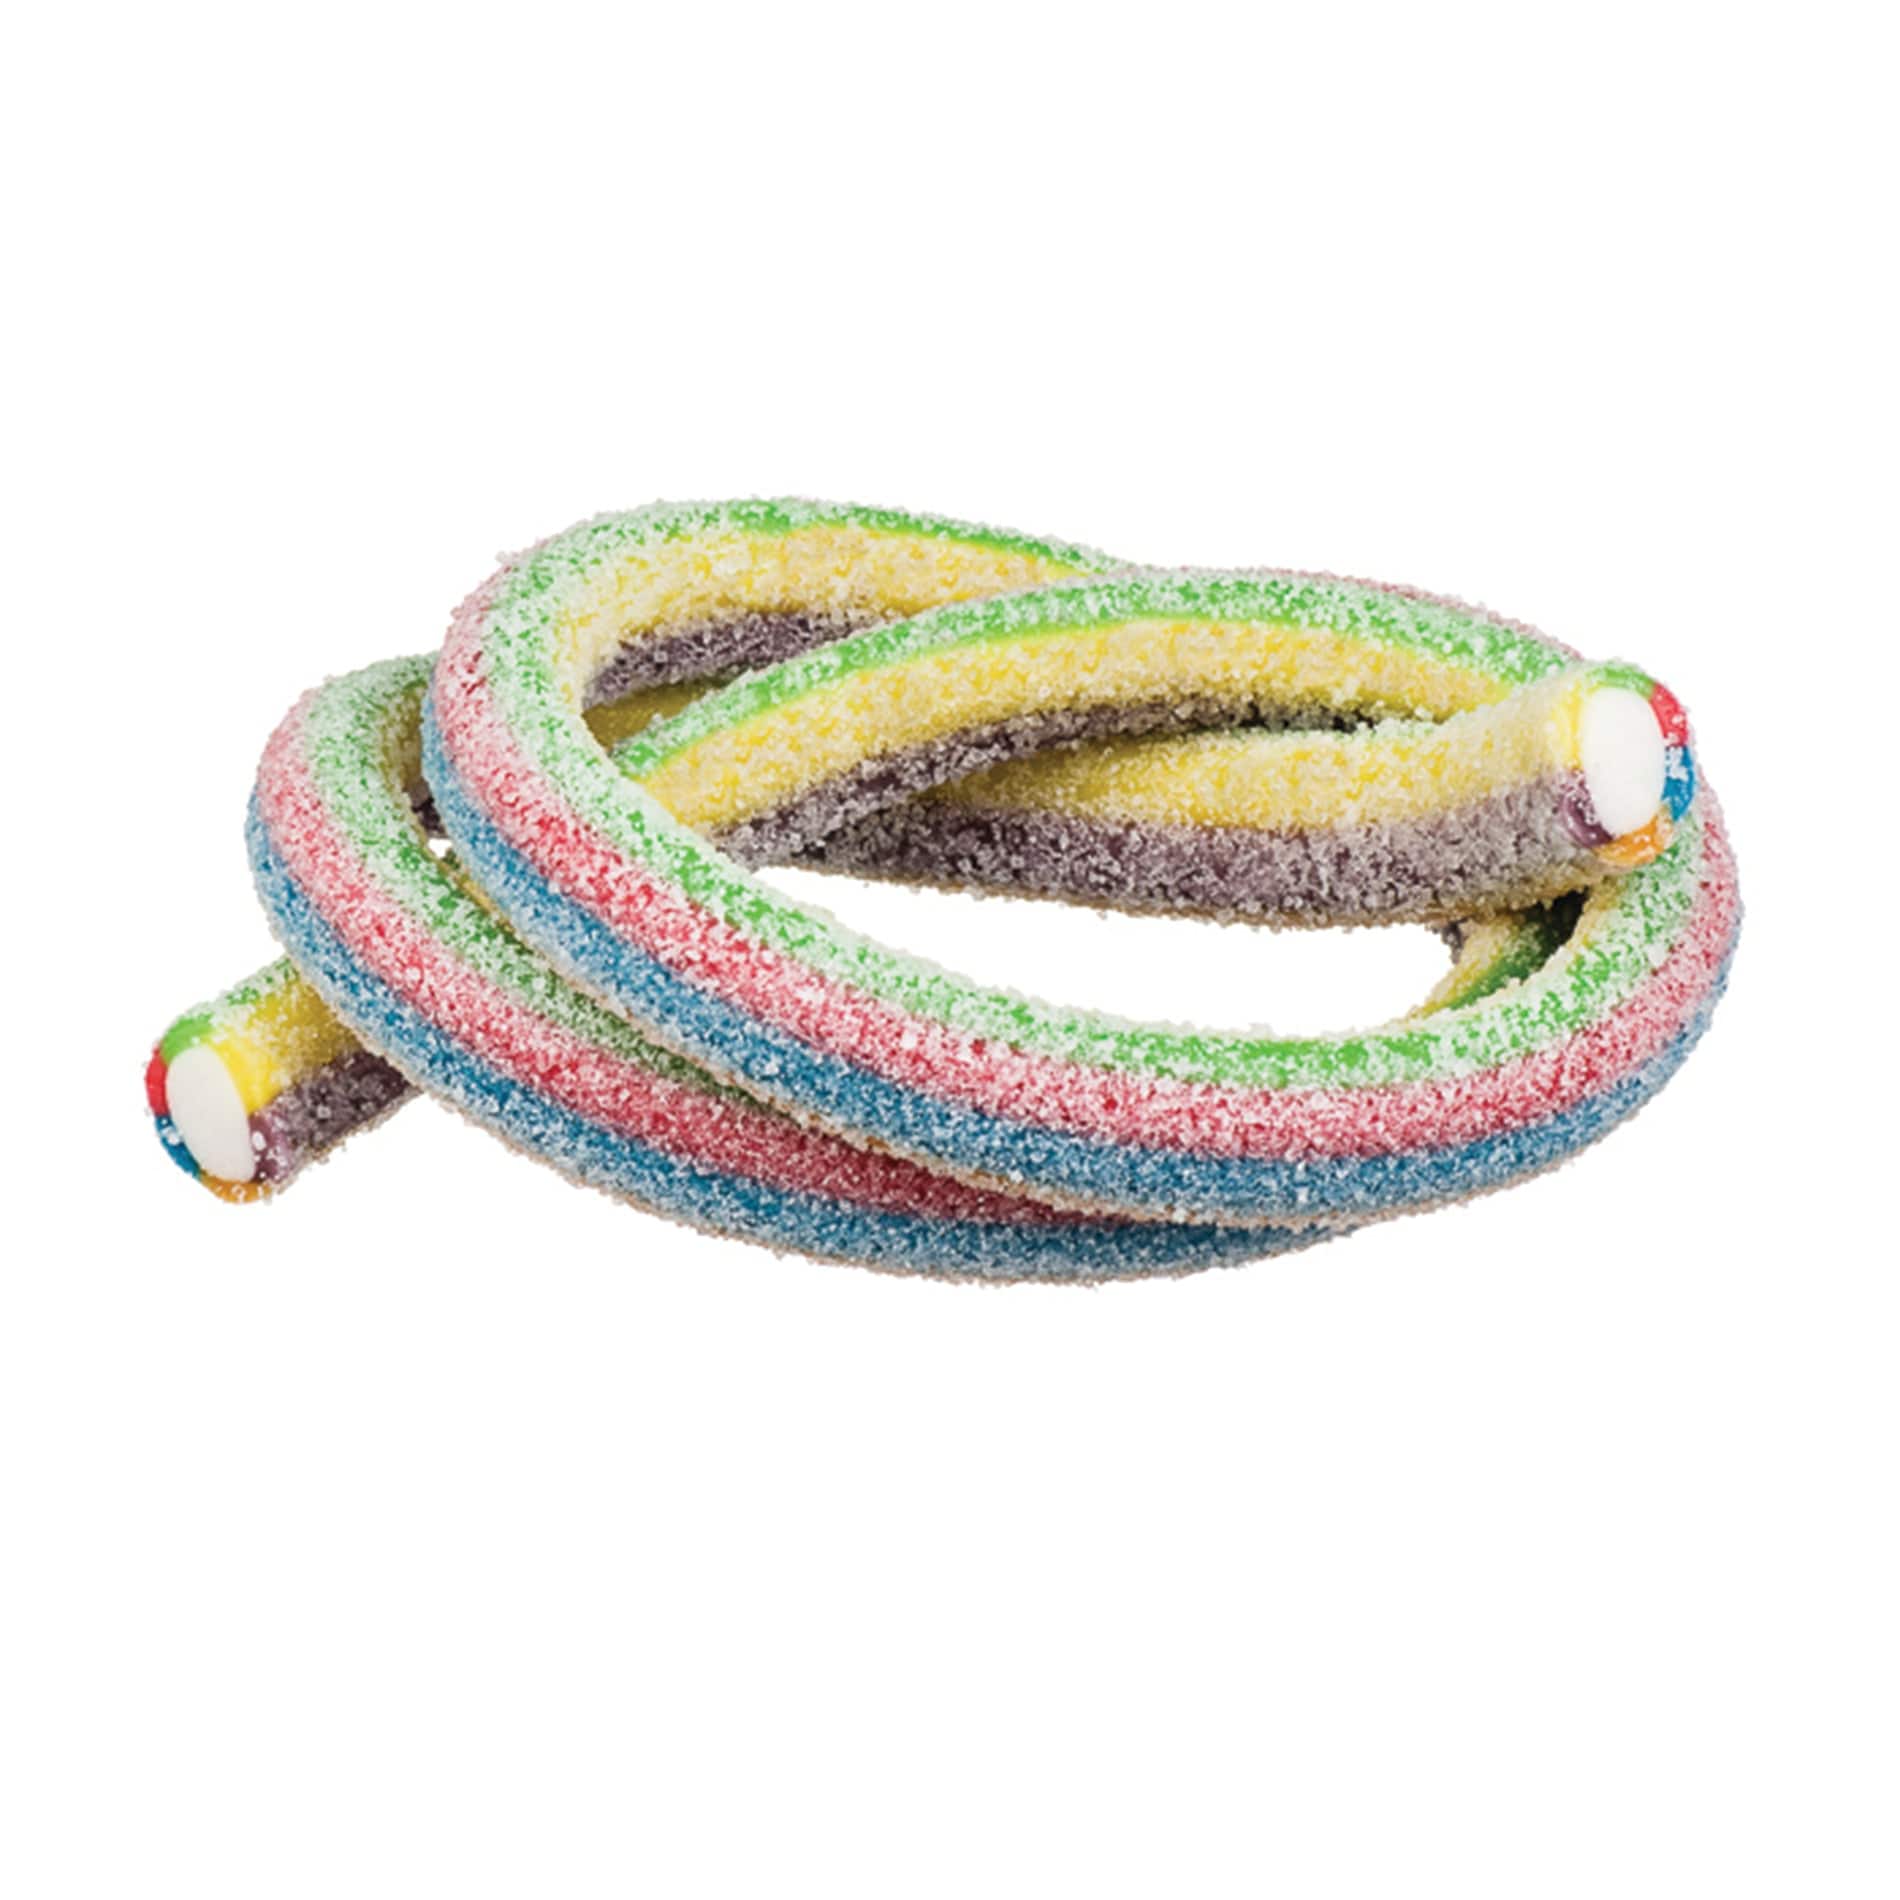 Meeega Cables Gummy Rope SOUR SUNSHINE FRUIT Meeega Cables European Chewy Rope Candy - Custom 12-Pack individually wrapped Meeega Cables, each over 2-feet long cups with lids and straws